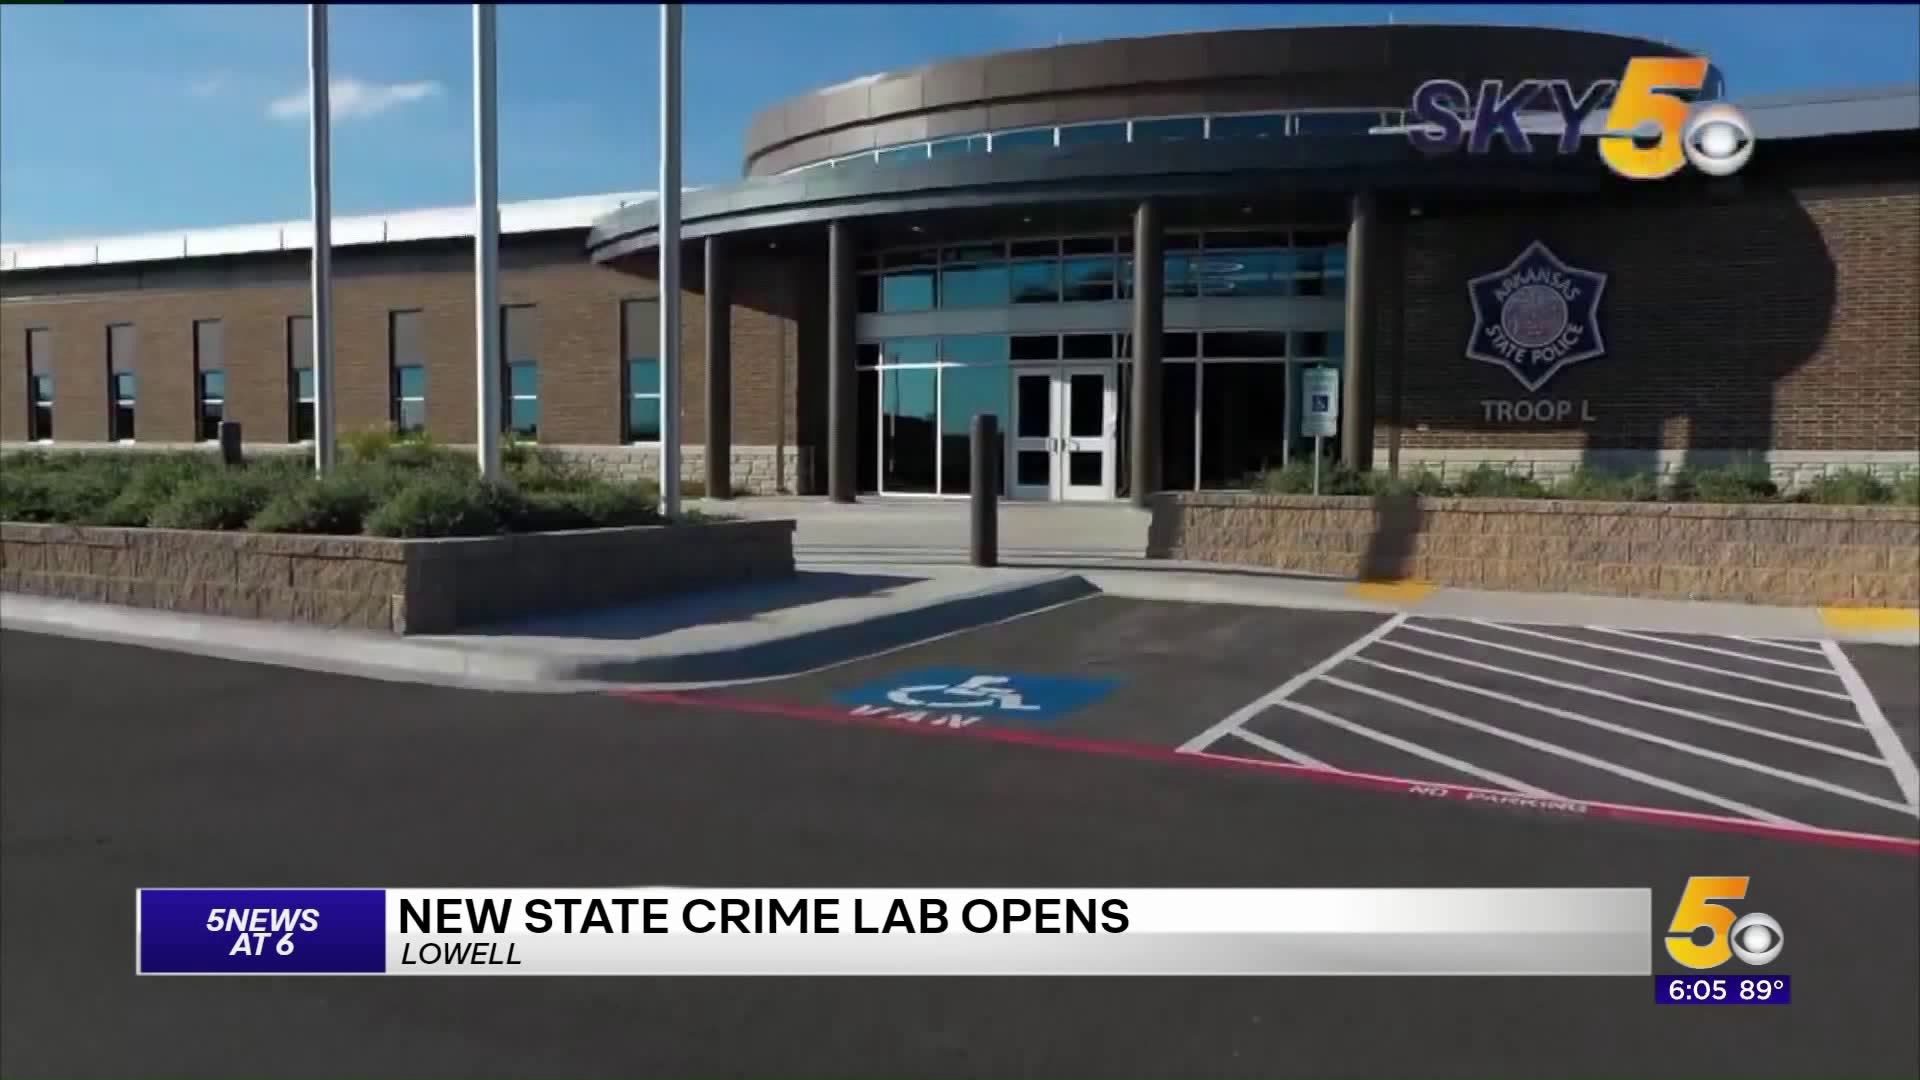 New State Crime Lab Opens in Lowell